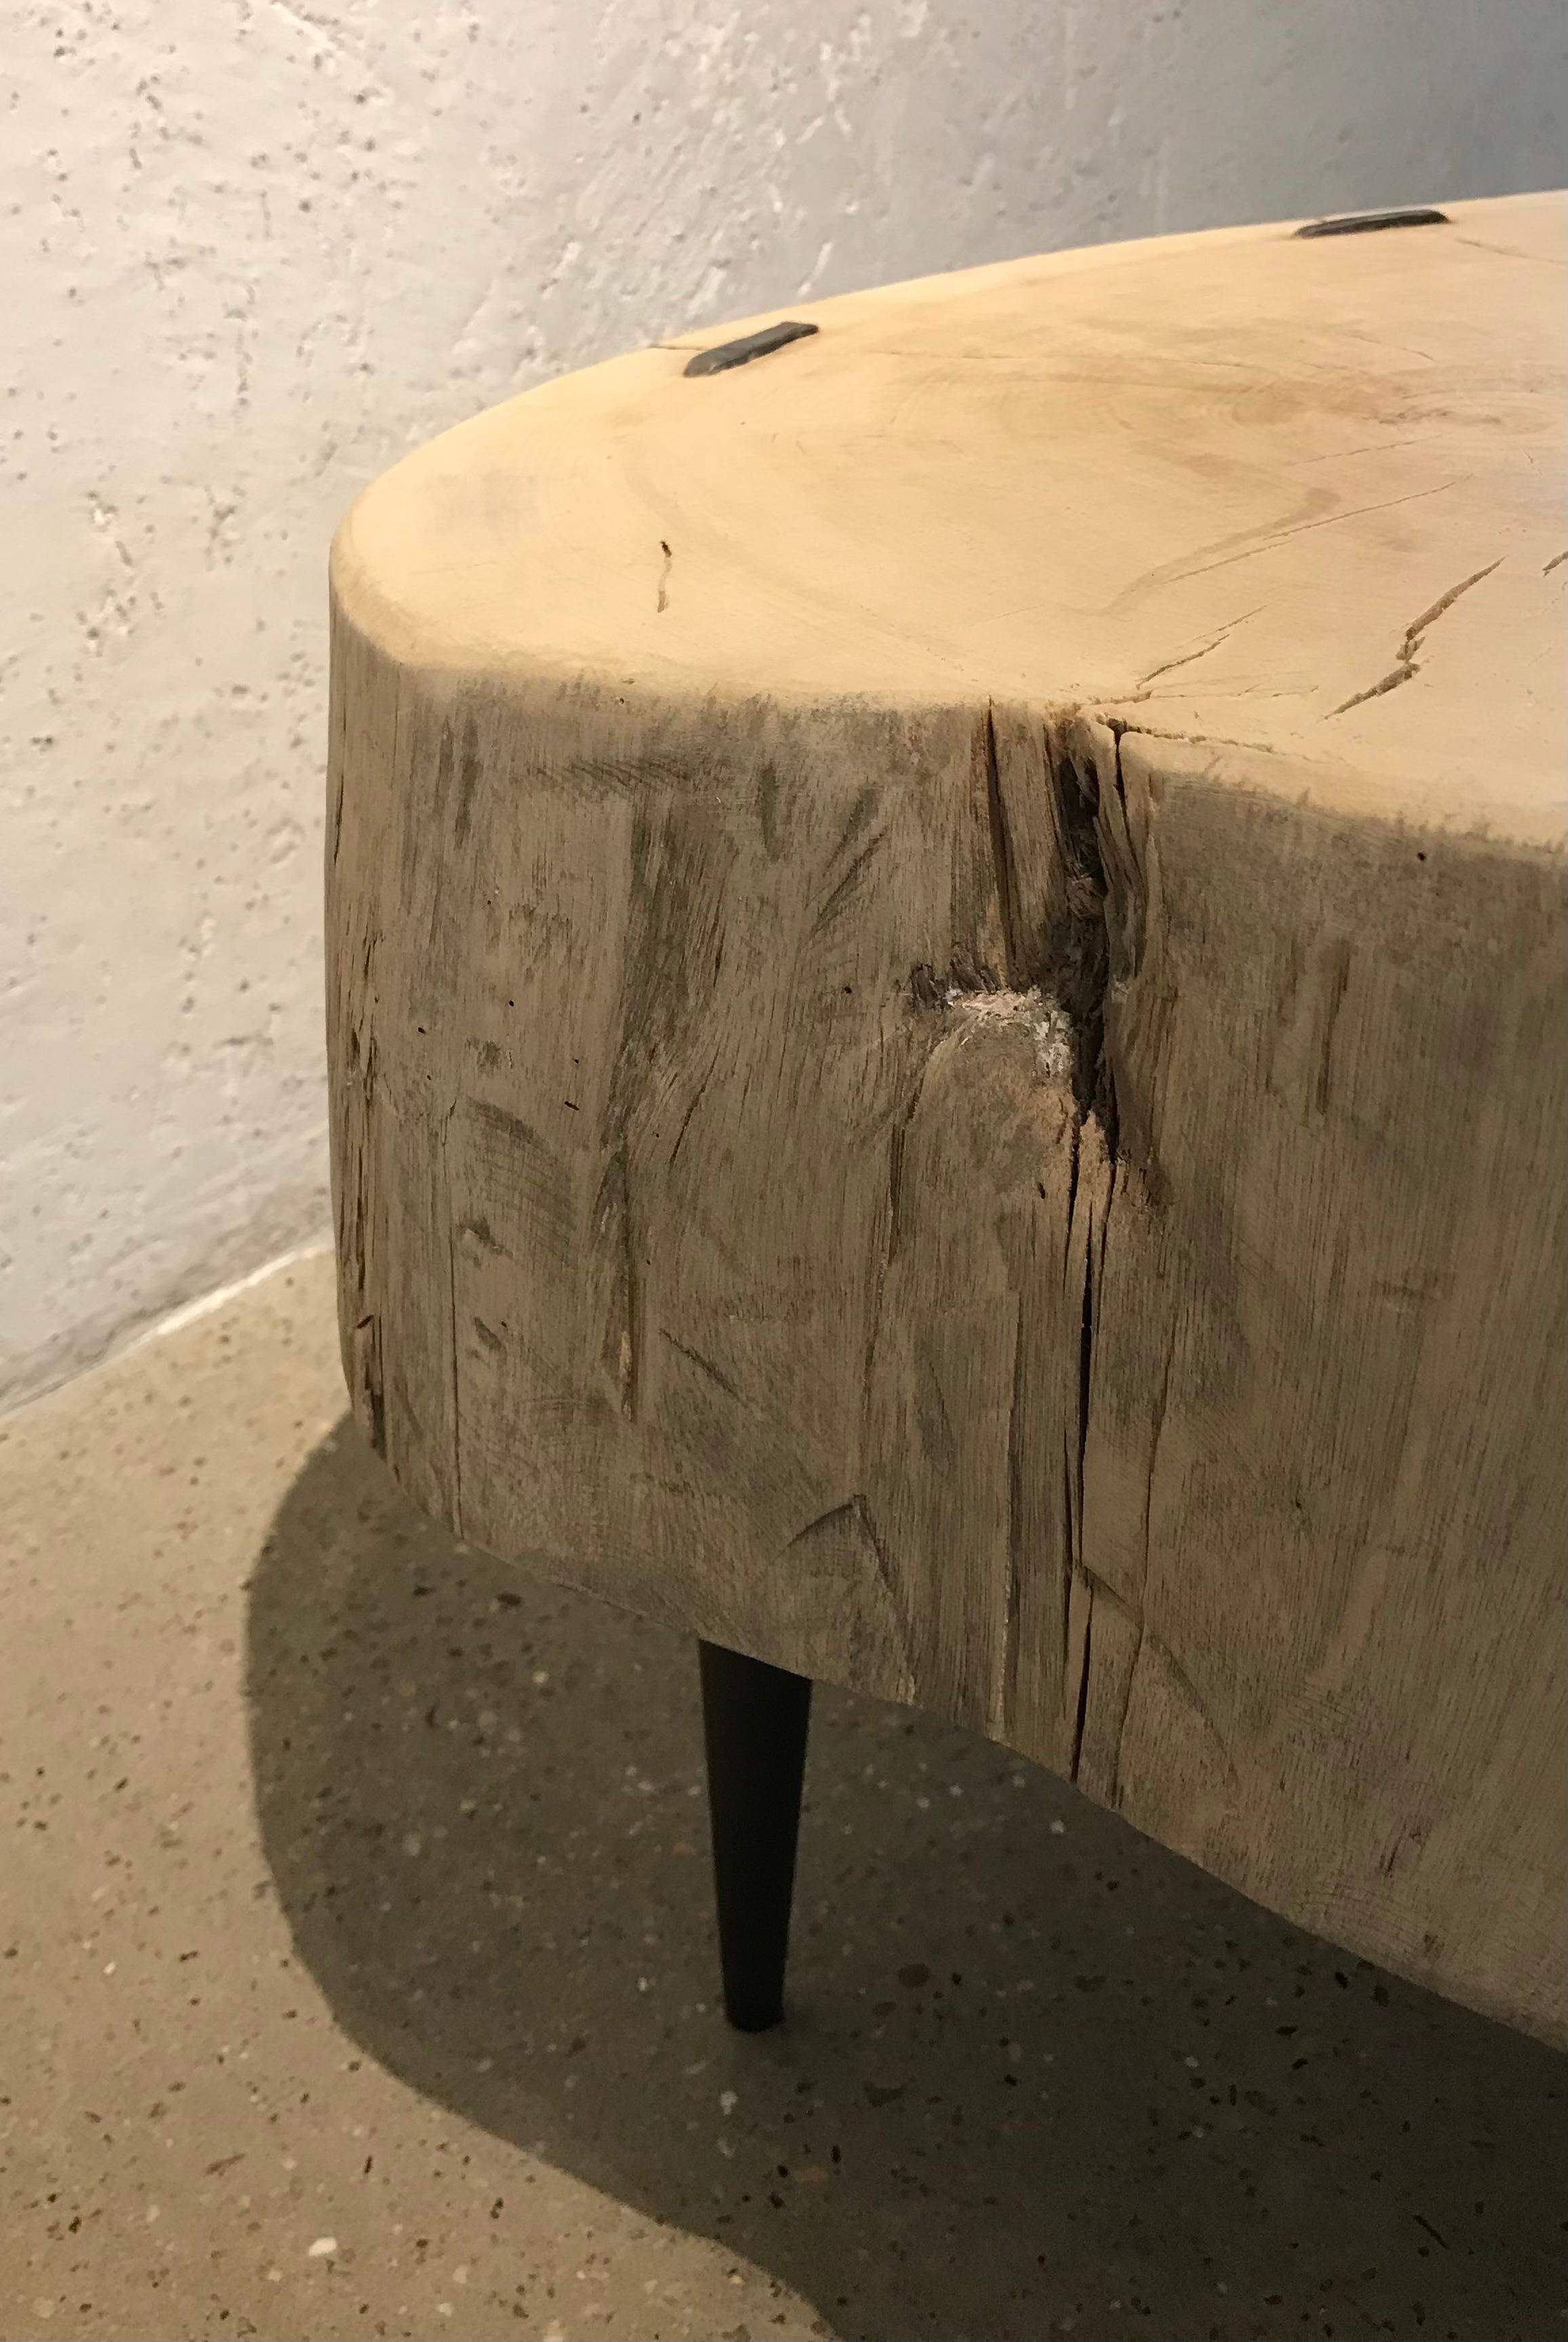 This gorgeous thick, tree trunk slab has been bleached and fabricated into a chic modern style table (coffee, side or cocktail) using hadn't forged iron staples and legs. Slab from China.